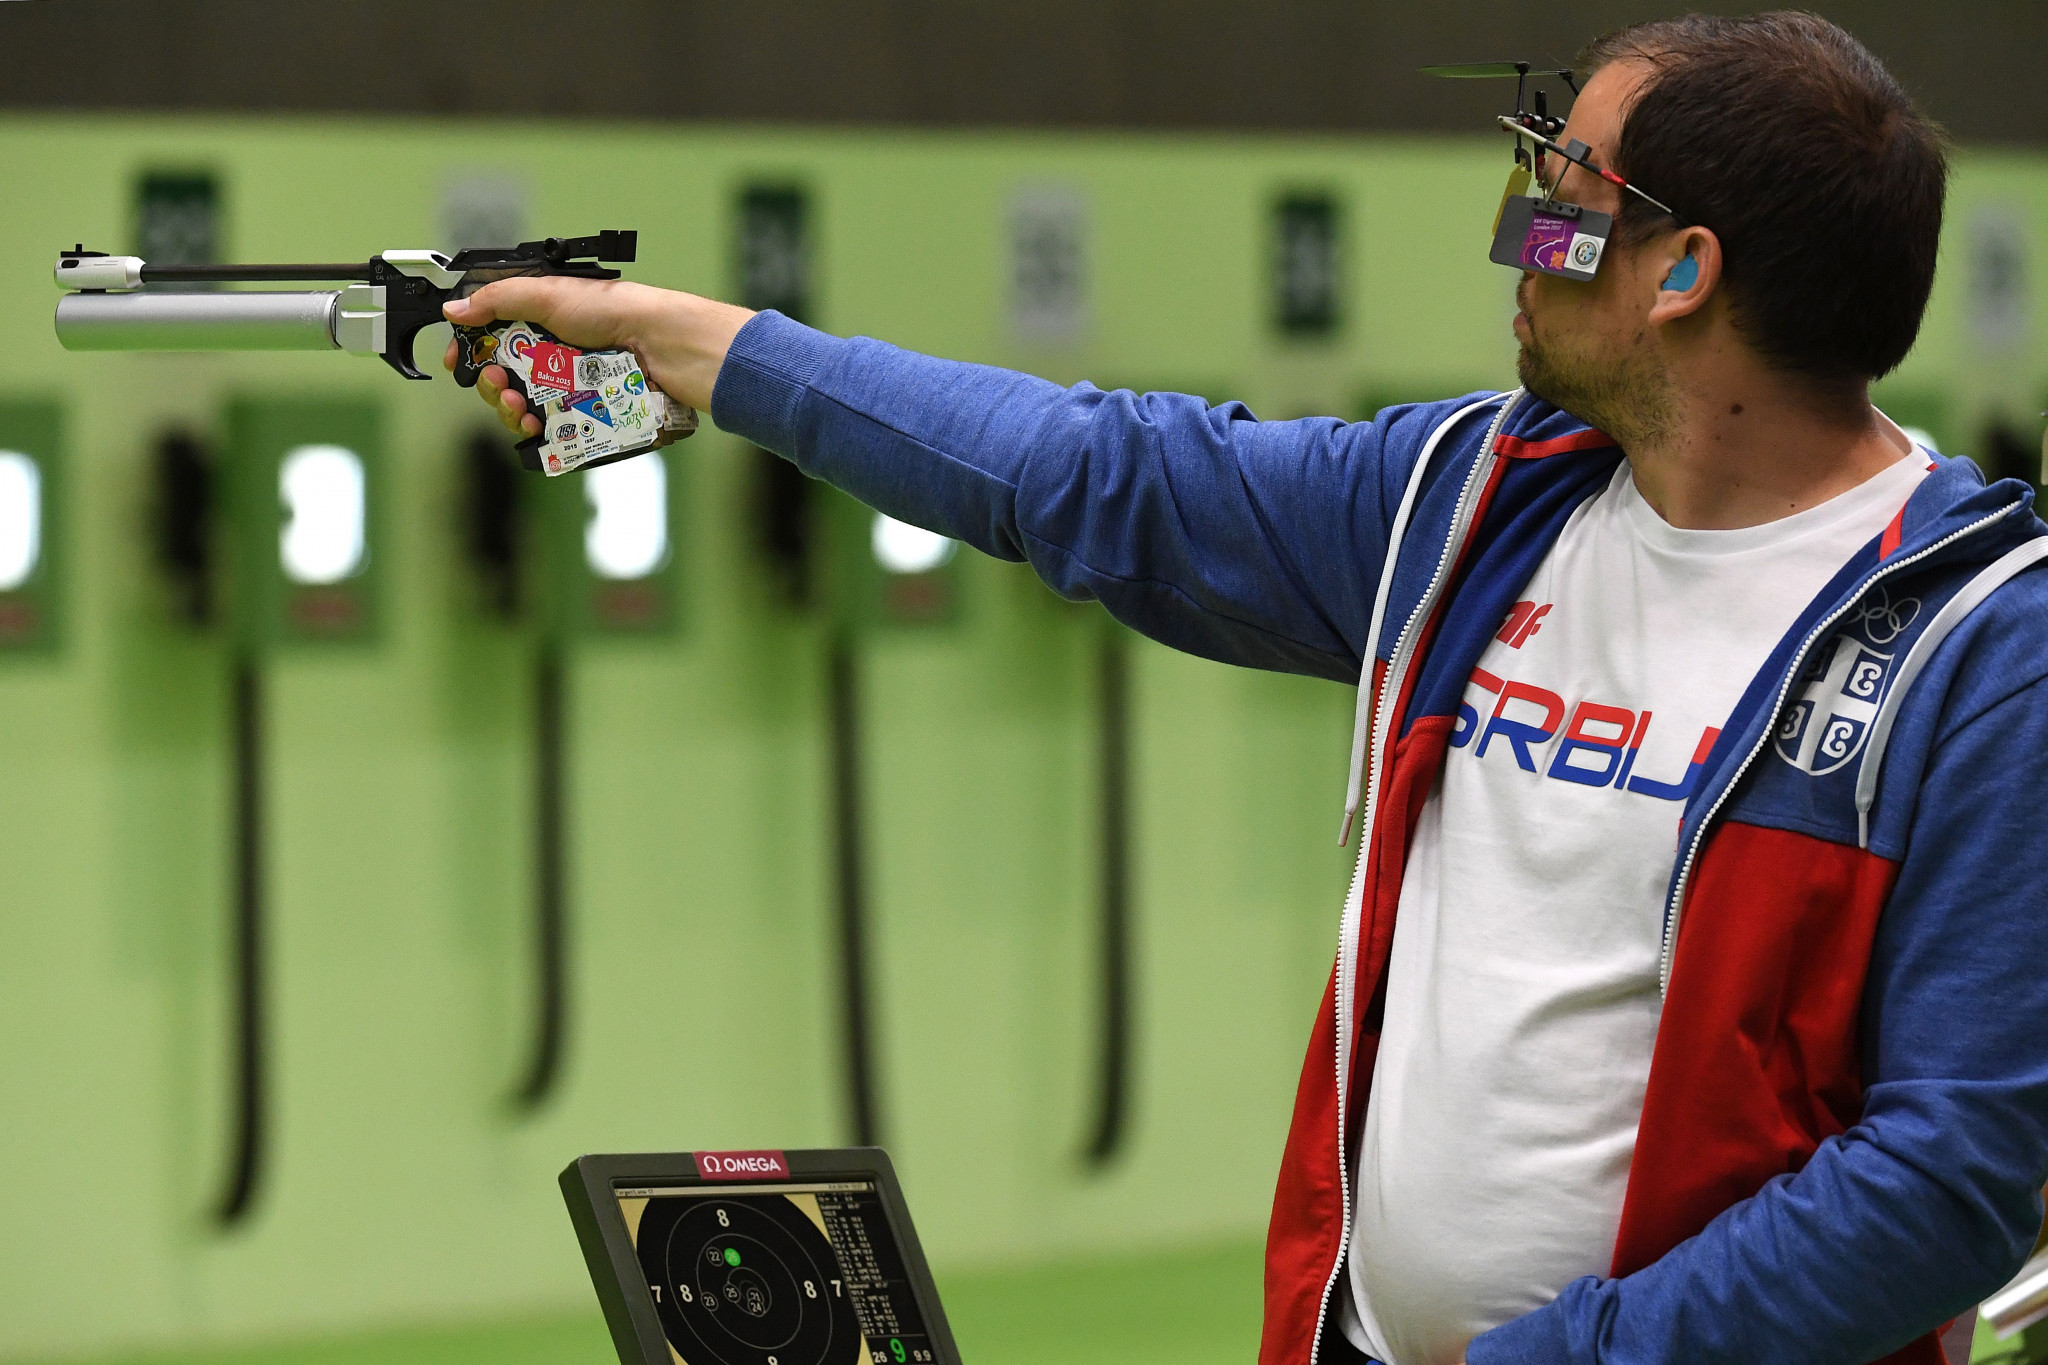 Croatia to stage combined European Shooting Championships ahead of Tokyo 2020